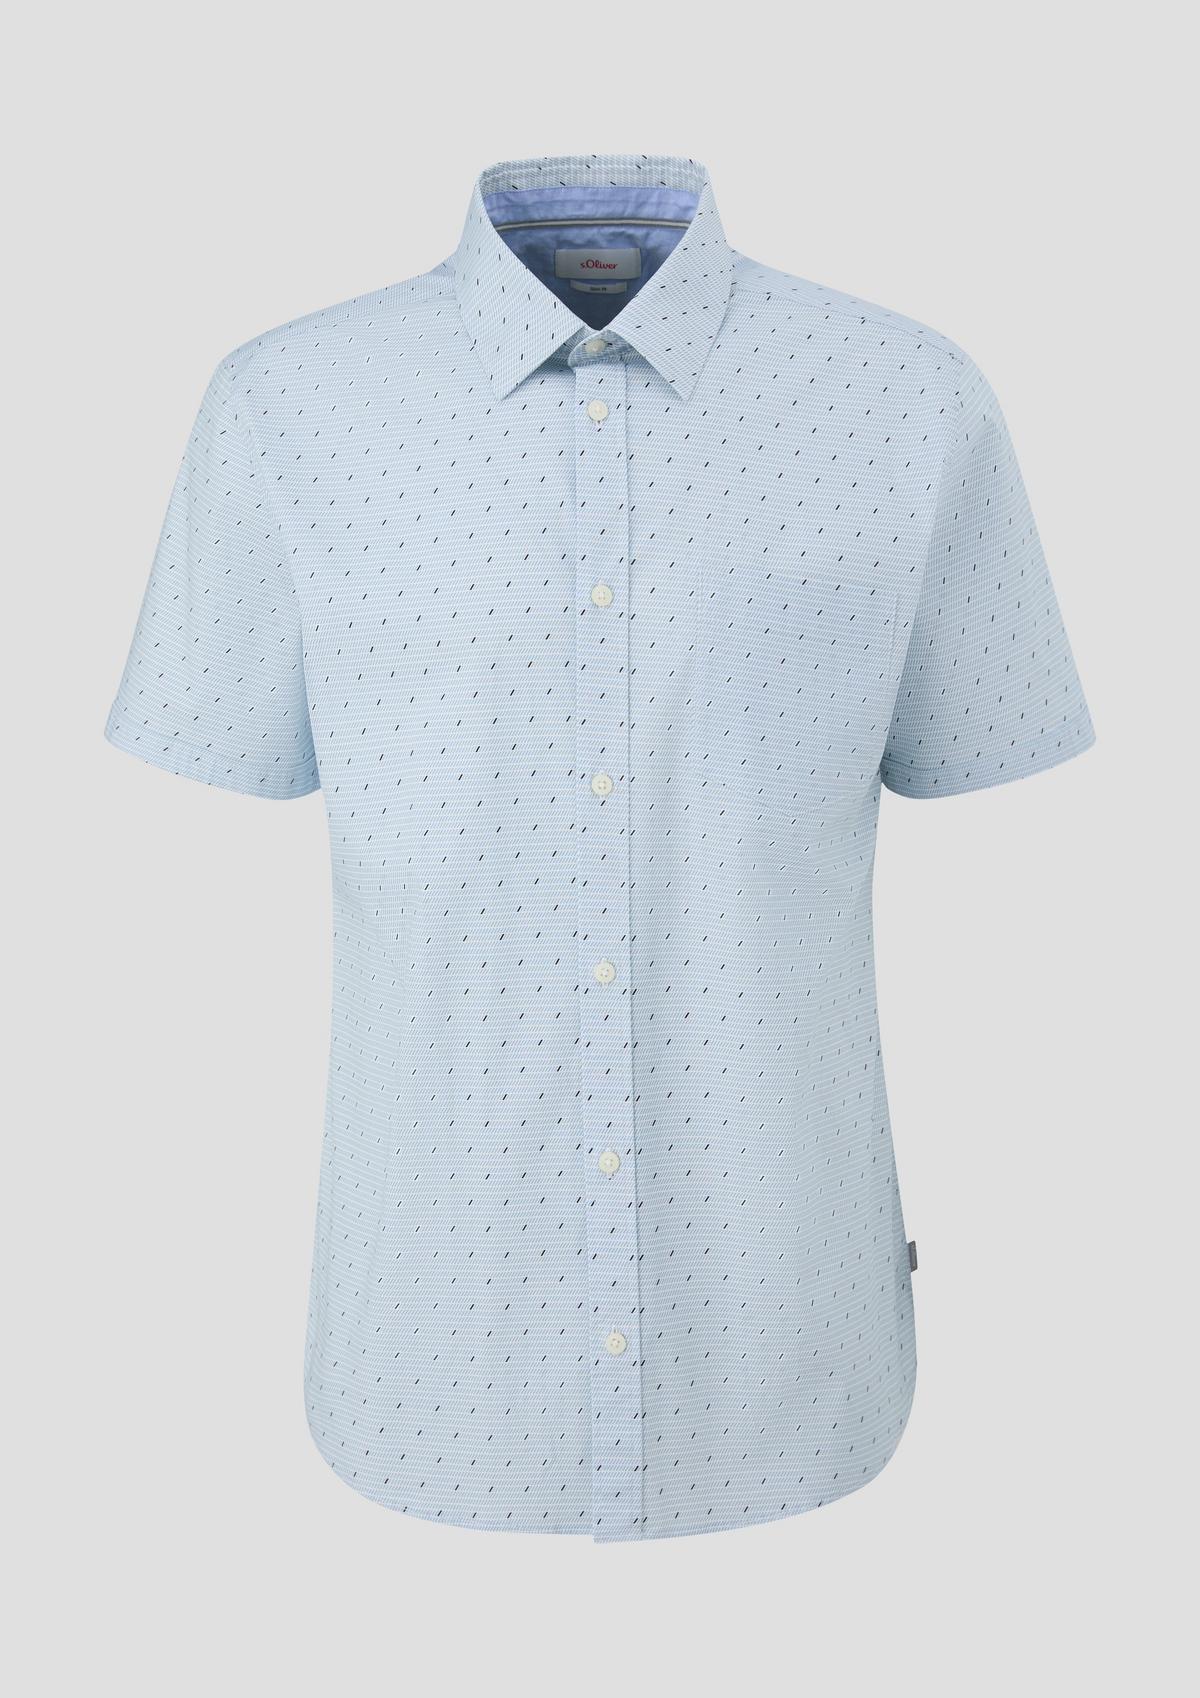 s.Oliver Short sleeve shirt with patch pocket